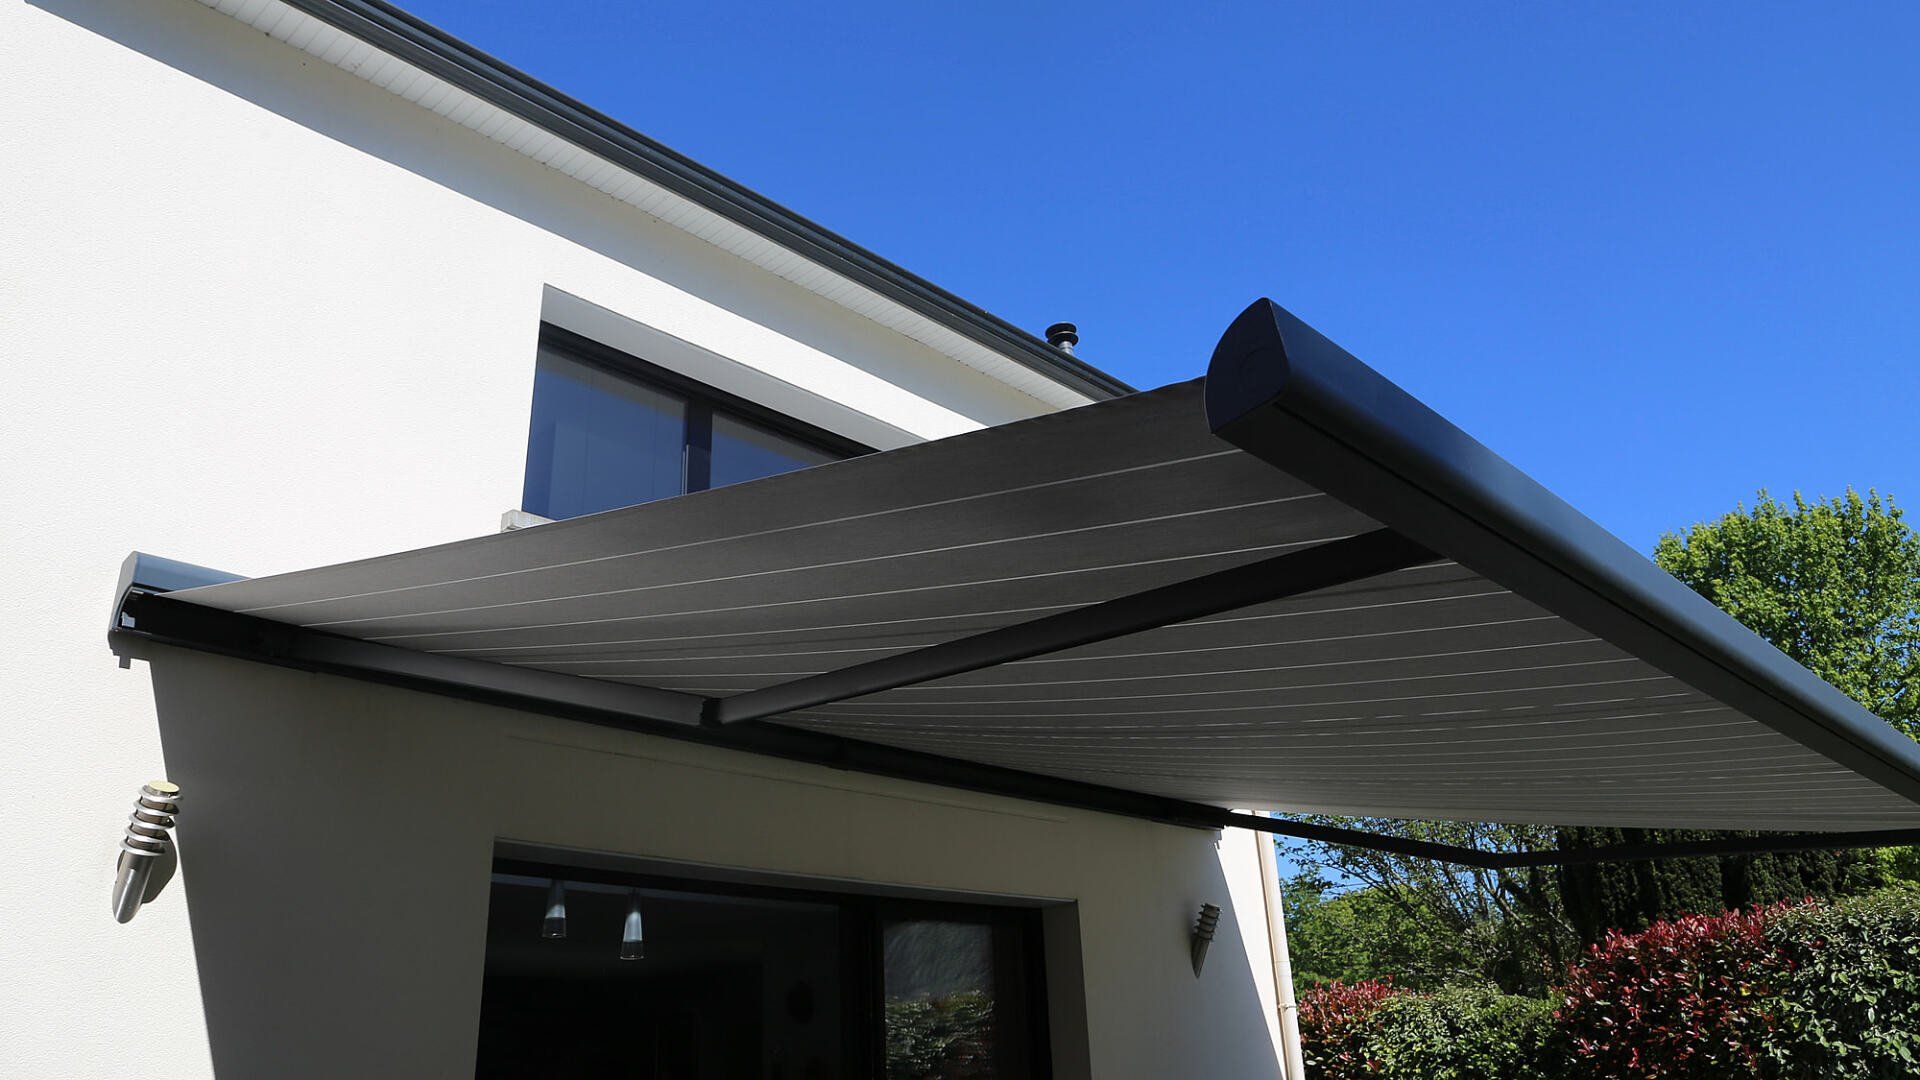 Key Factors To Consider For A Creative Awning Design